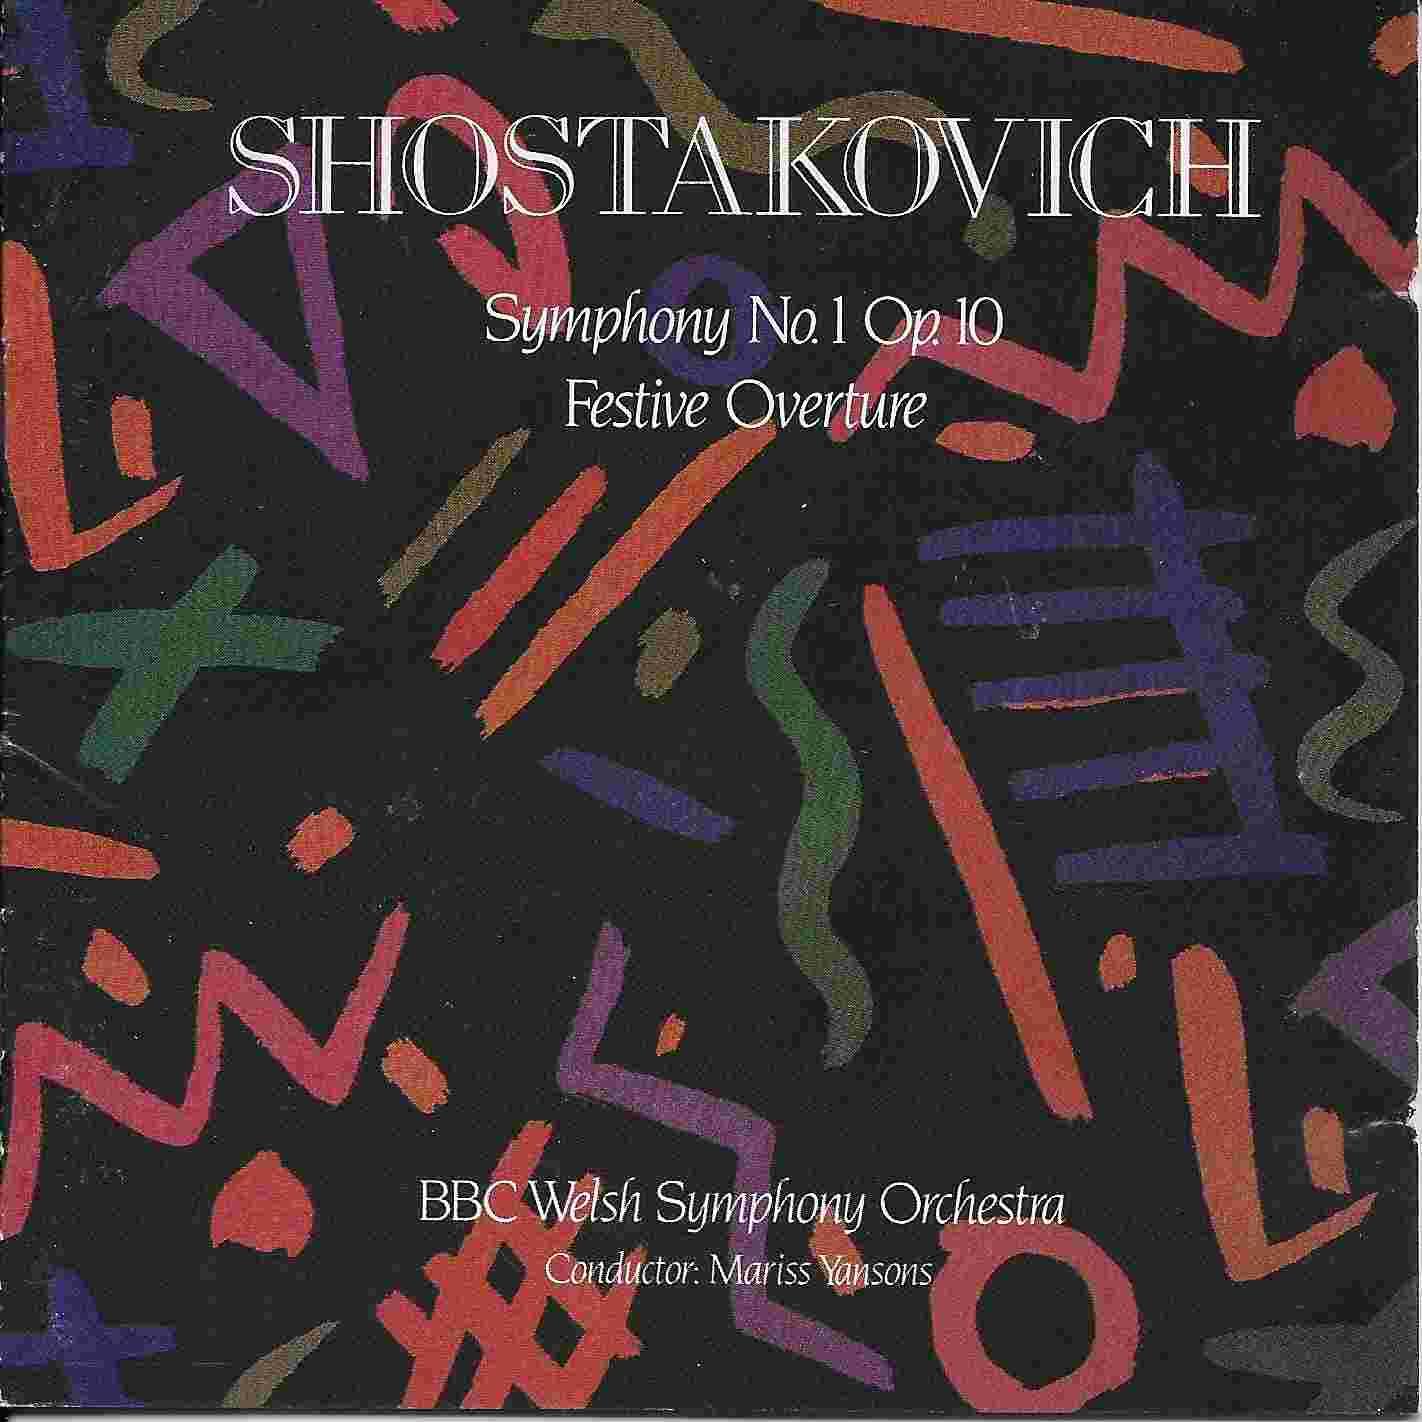 Picture of BBCCD637X Shostakovich symphony no. 1 - Festival overture by artist Dmitri Shostakovich from the BBC cds - Records and Tapes library